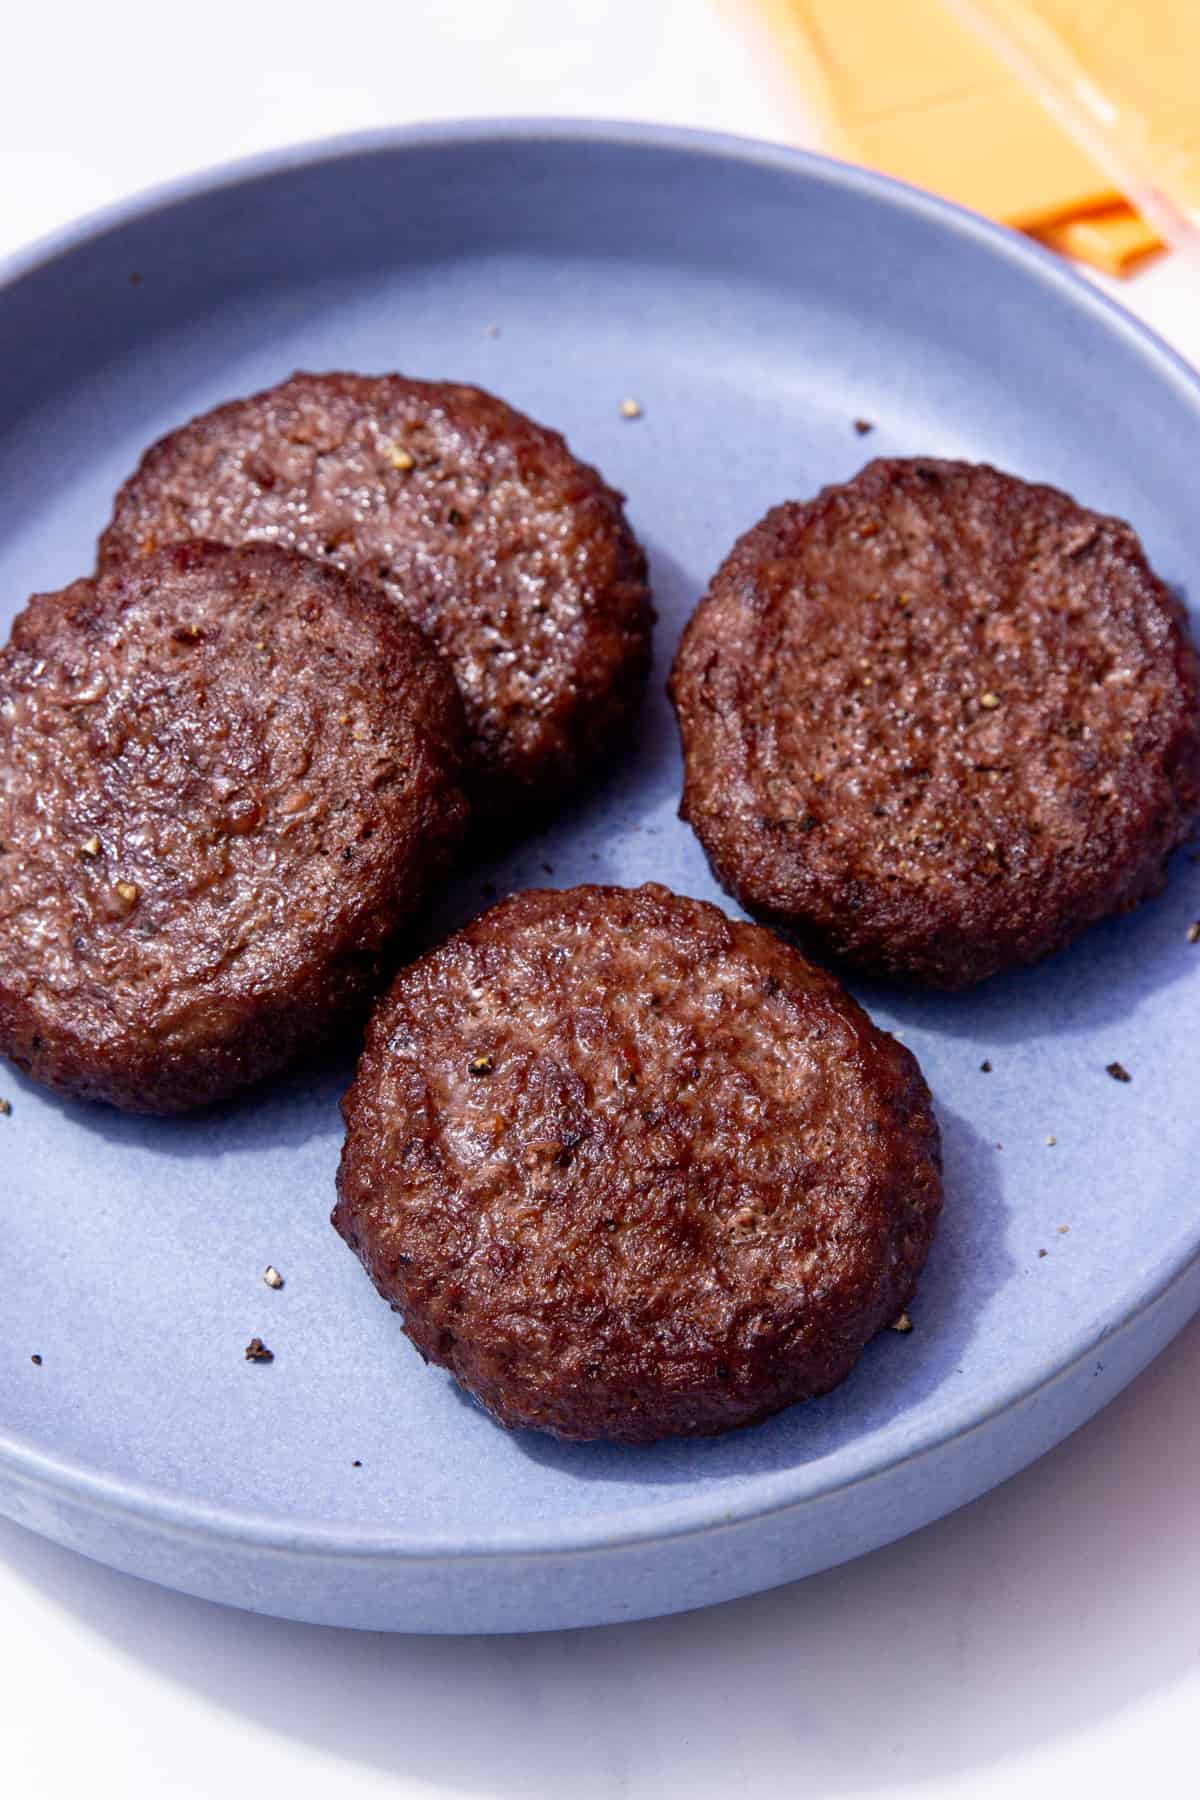 4 cooked, dark browned burgers on a blue plate with some yellow cheese slices in partial view.